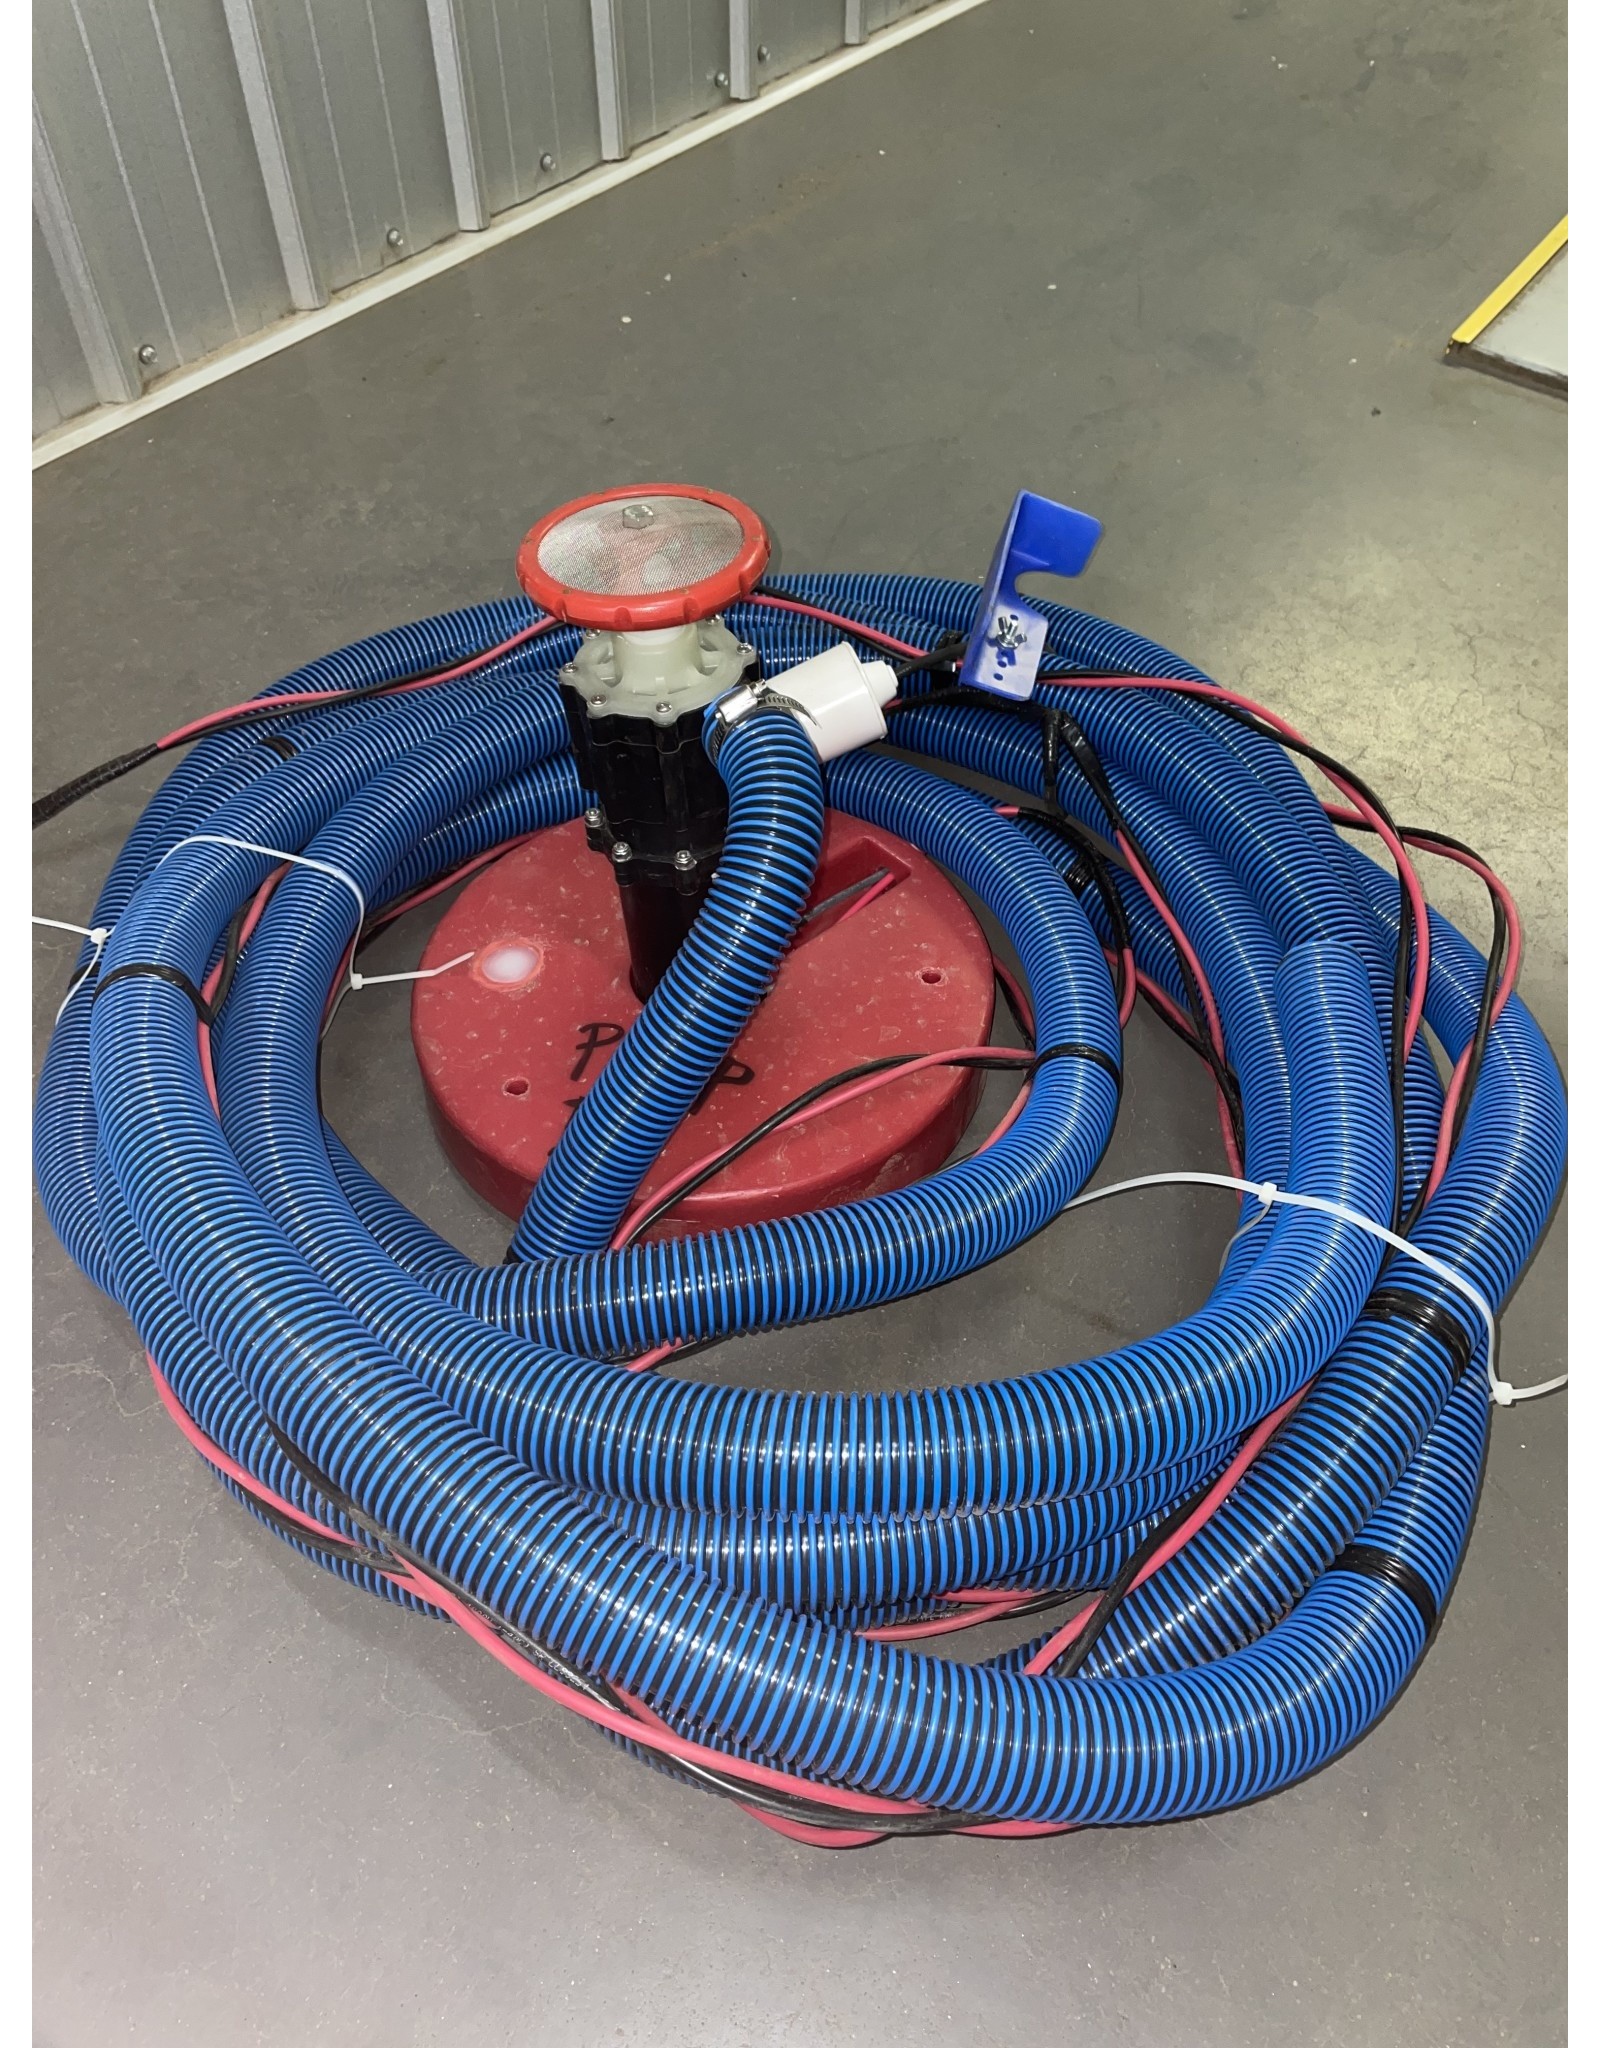 FLOATING PUMP B*** high lift - low volume PM5 12 v floating pump with 13 amp pill switch & 50' Hose & Wire - s/n 392 - 10FT 10gal min 100 pair, 30ft 10gal min 100 pair,  (35 feet, volume drops to 5 gal/m